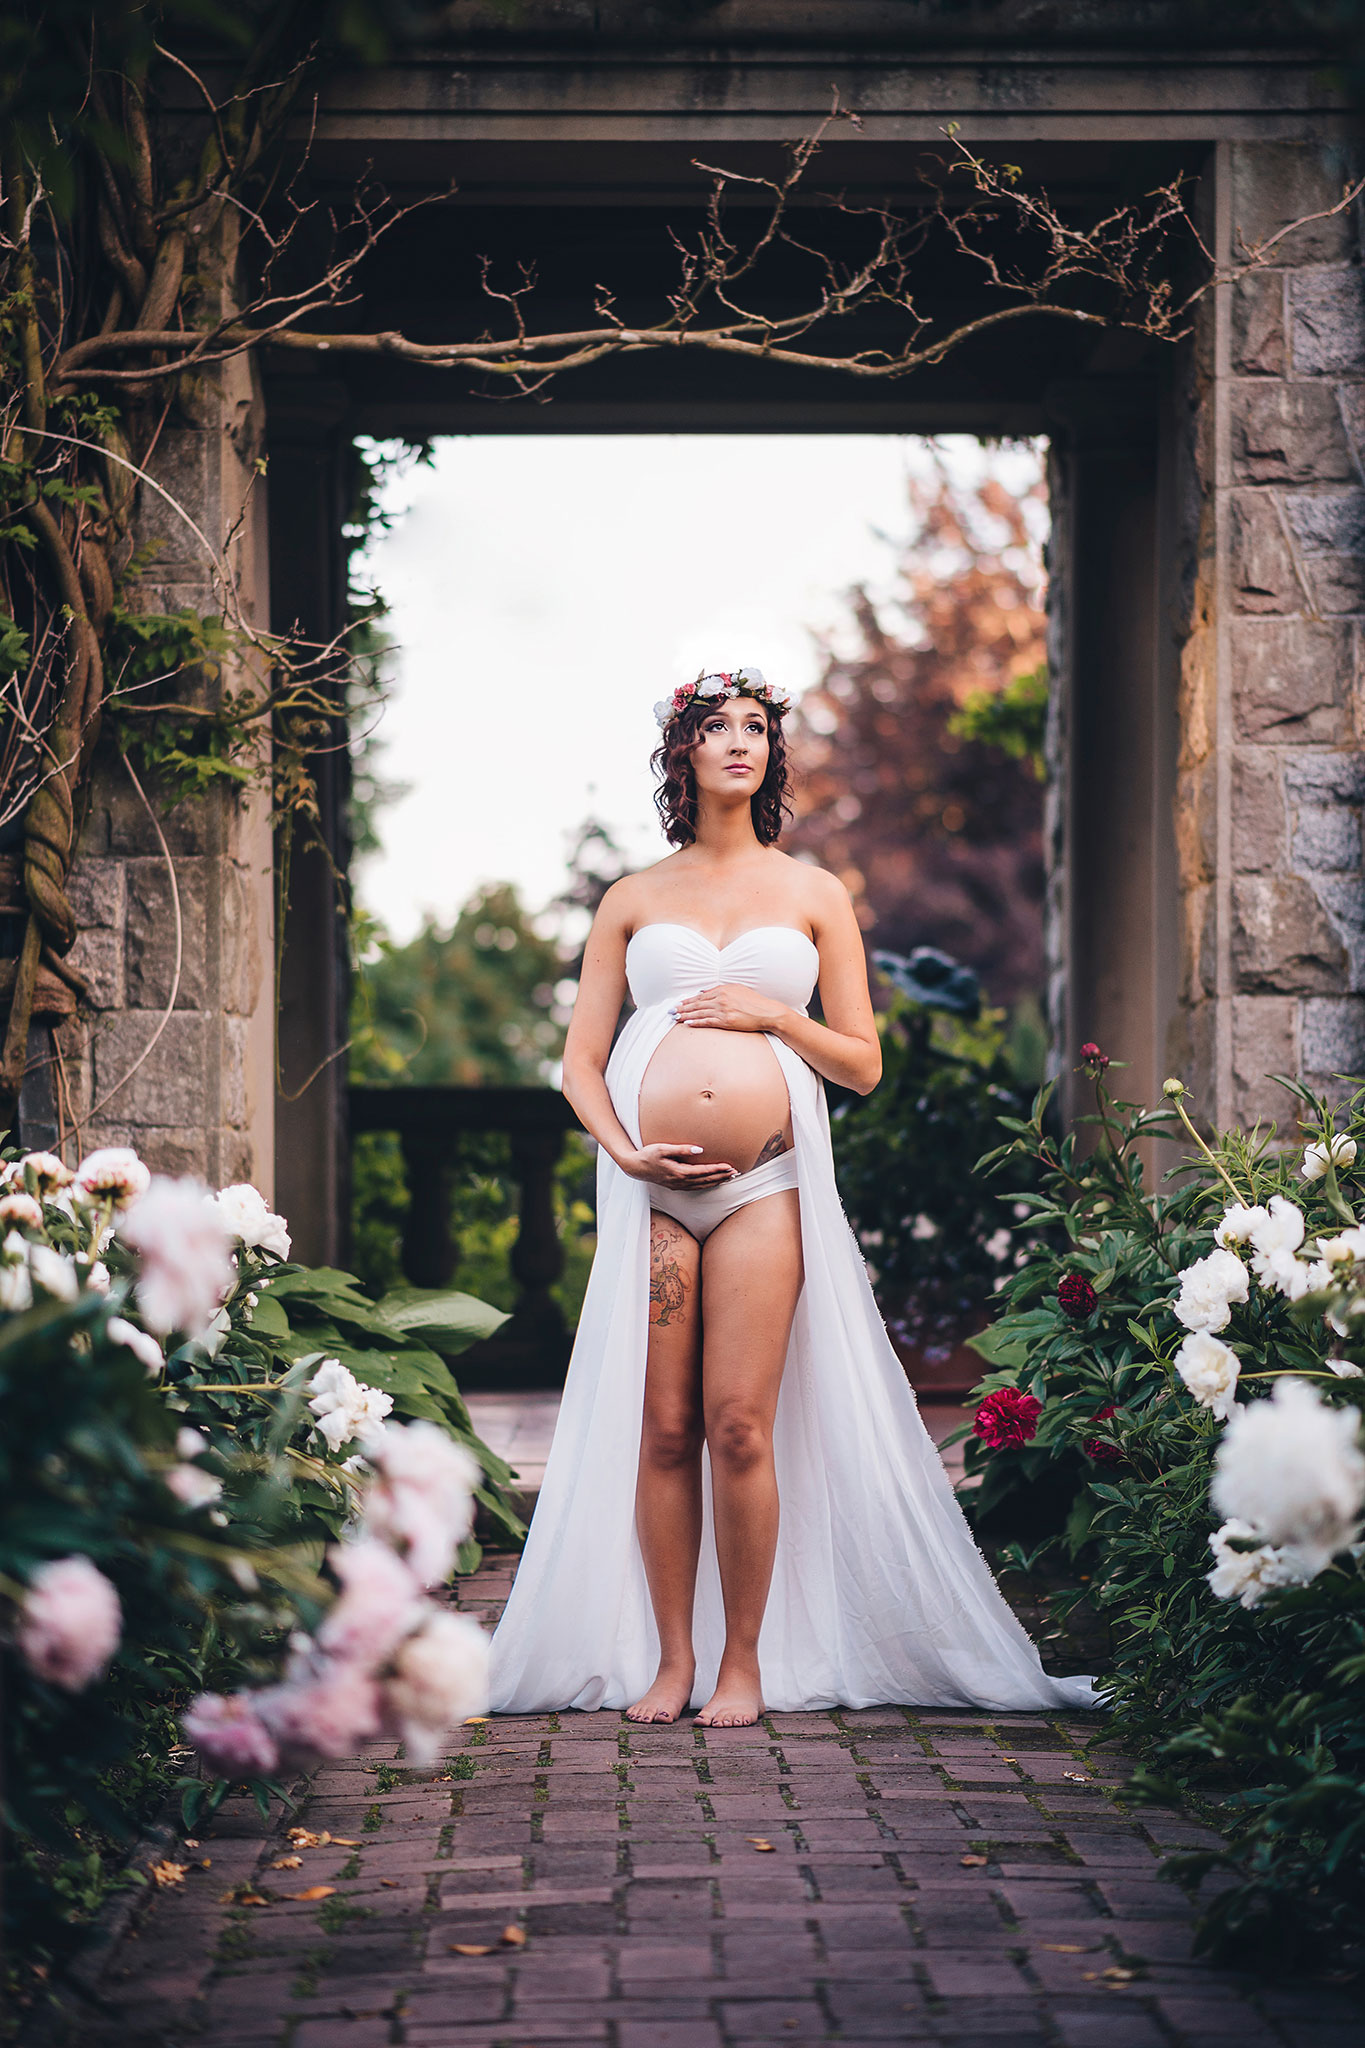 Maternity photography with flowing white maternity gown and flower crown at Hatley Castle near Victoria.